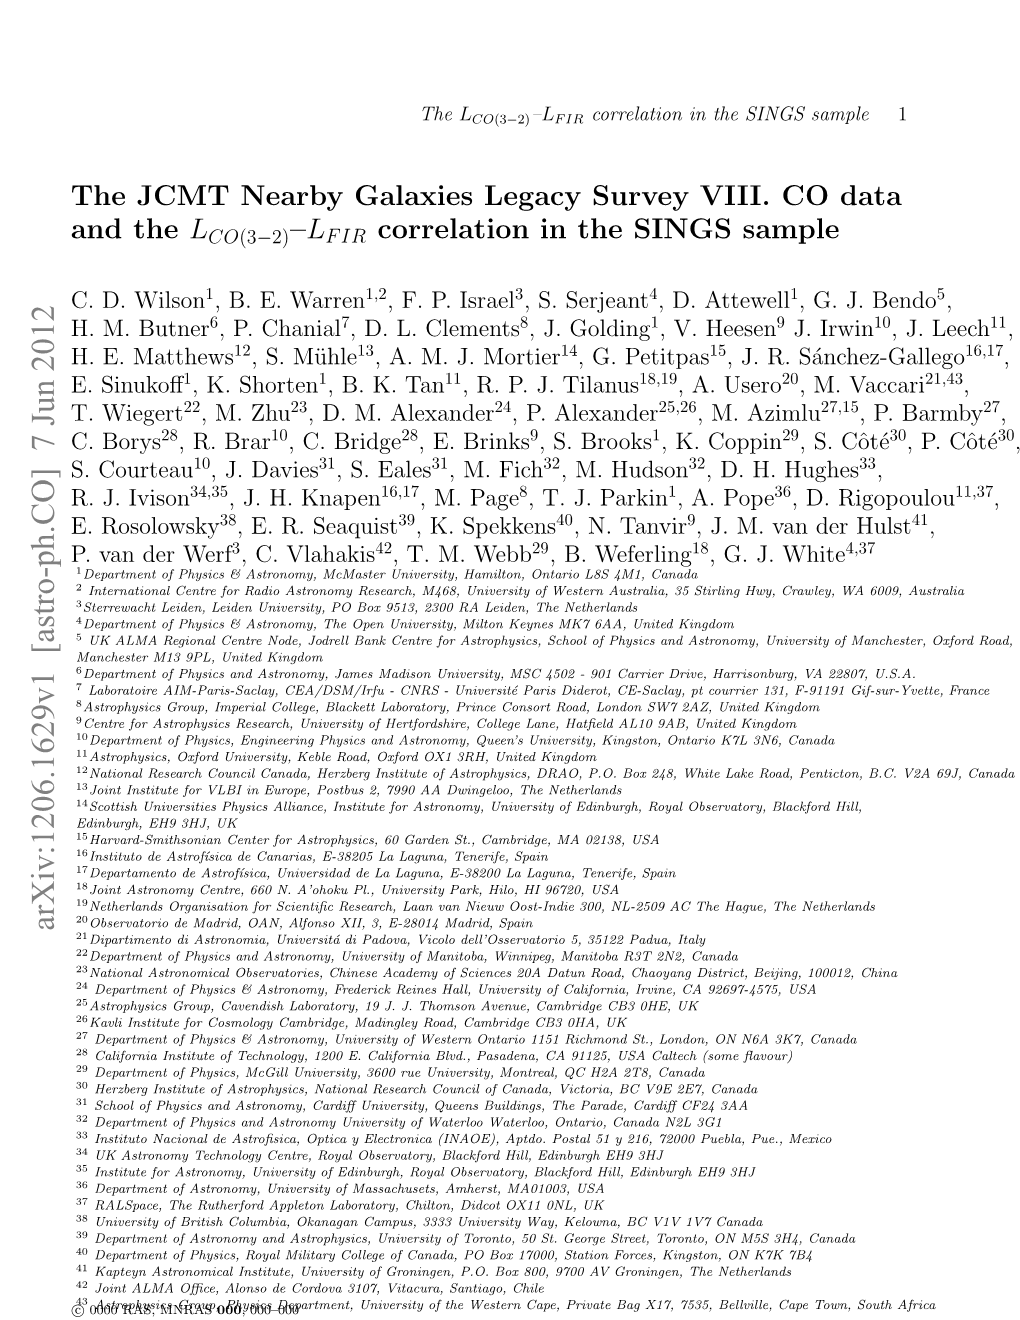 The JCMT Nearby Galaxies Legacy Survey VIII. CO Data and the LCO(3